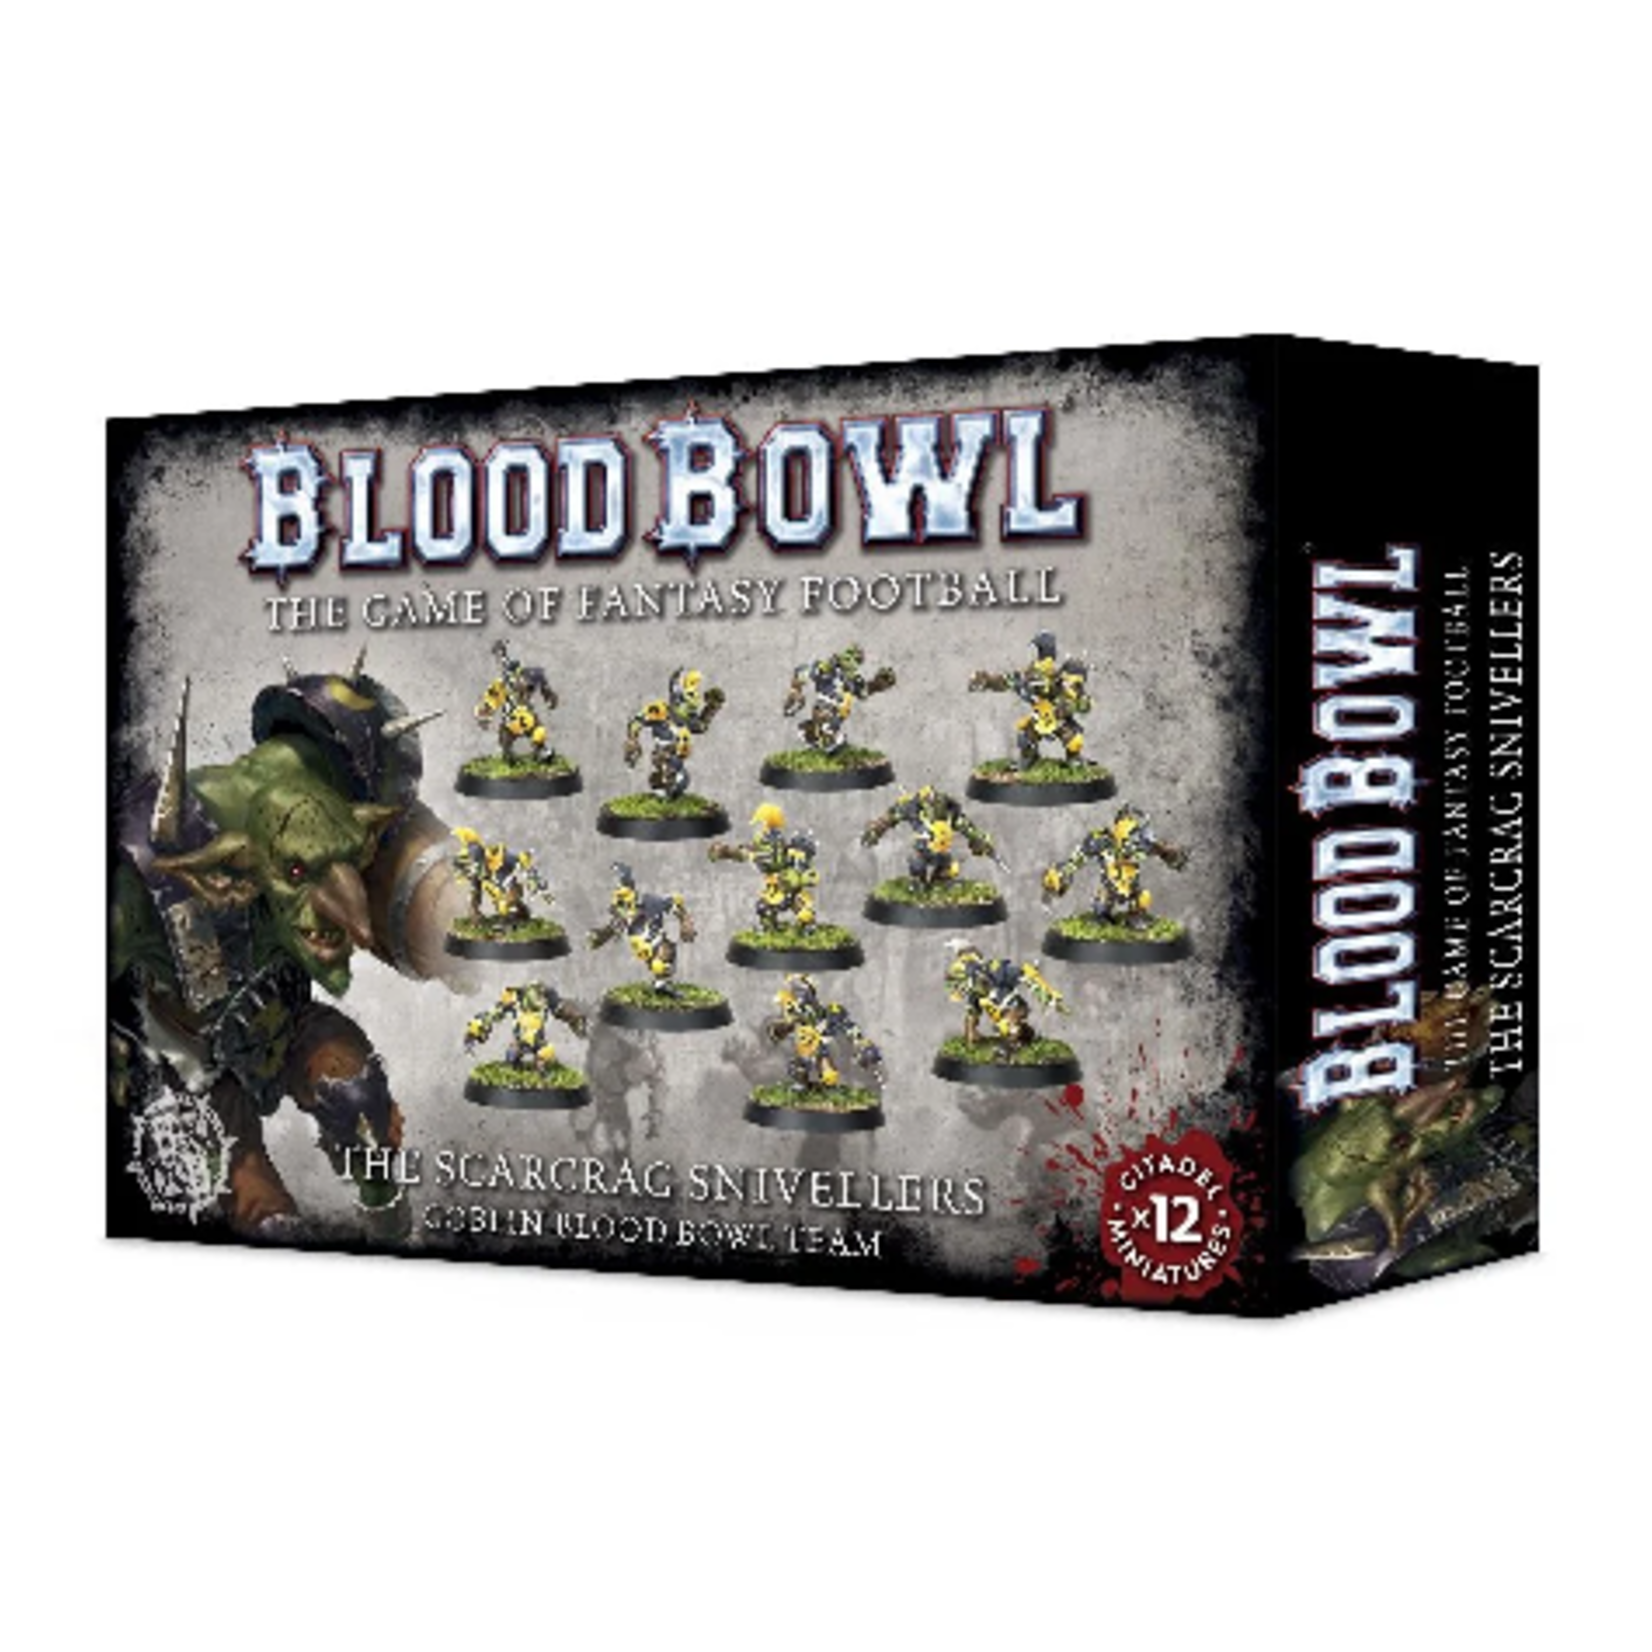 Blood Bowl: The Scarcrag Snivellers - Goblin Team